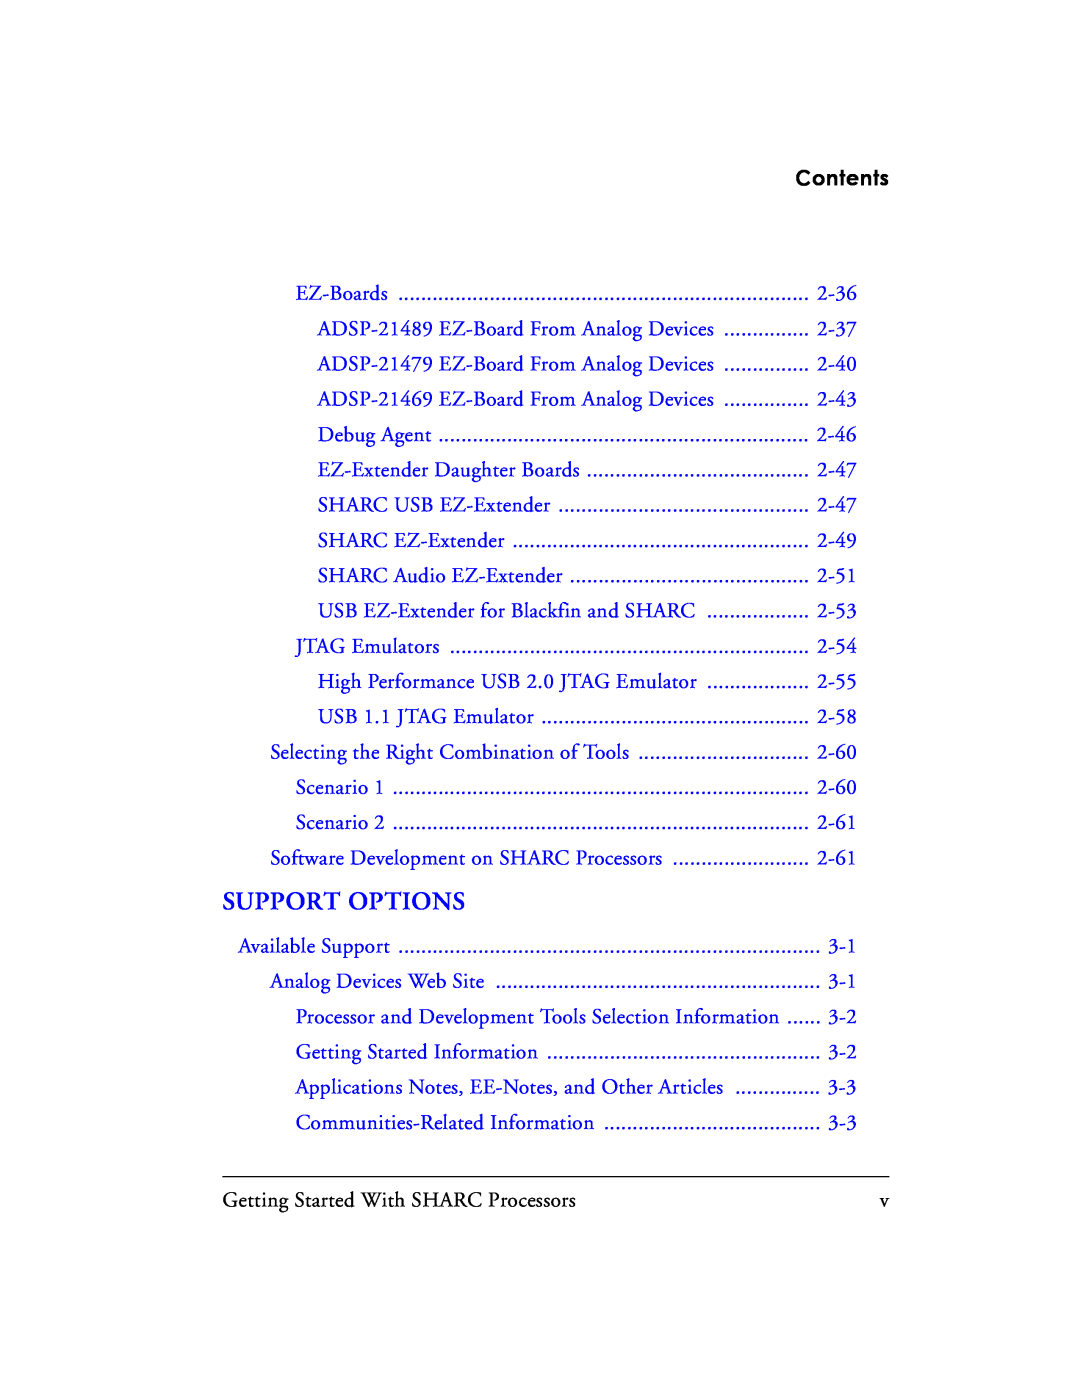 Analog Devices 82-003536-01 manual Support Options, Contents 